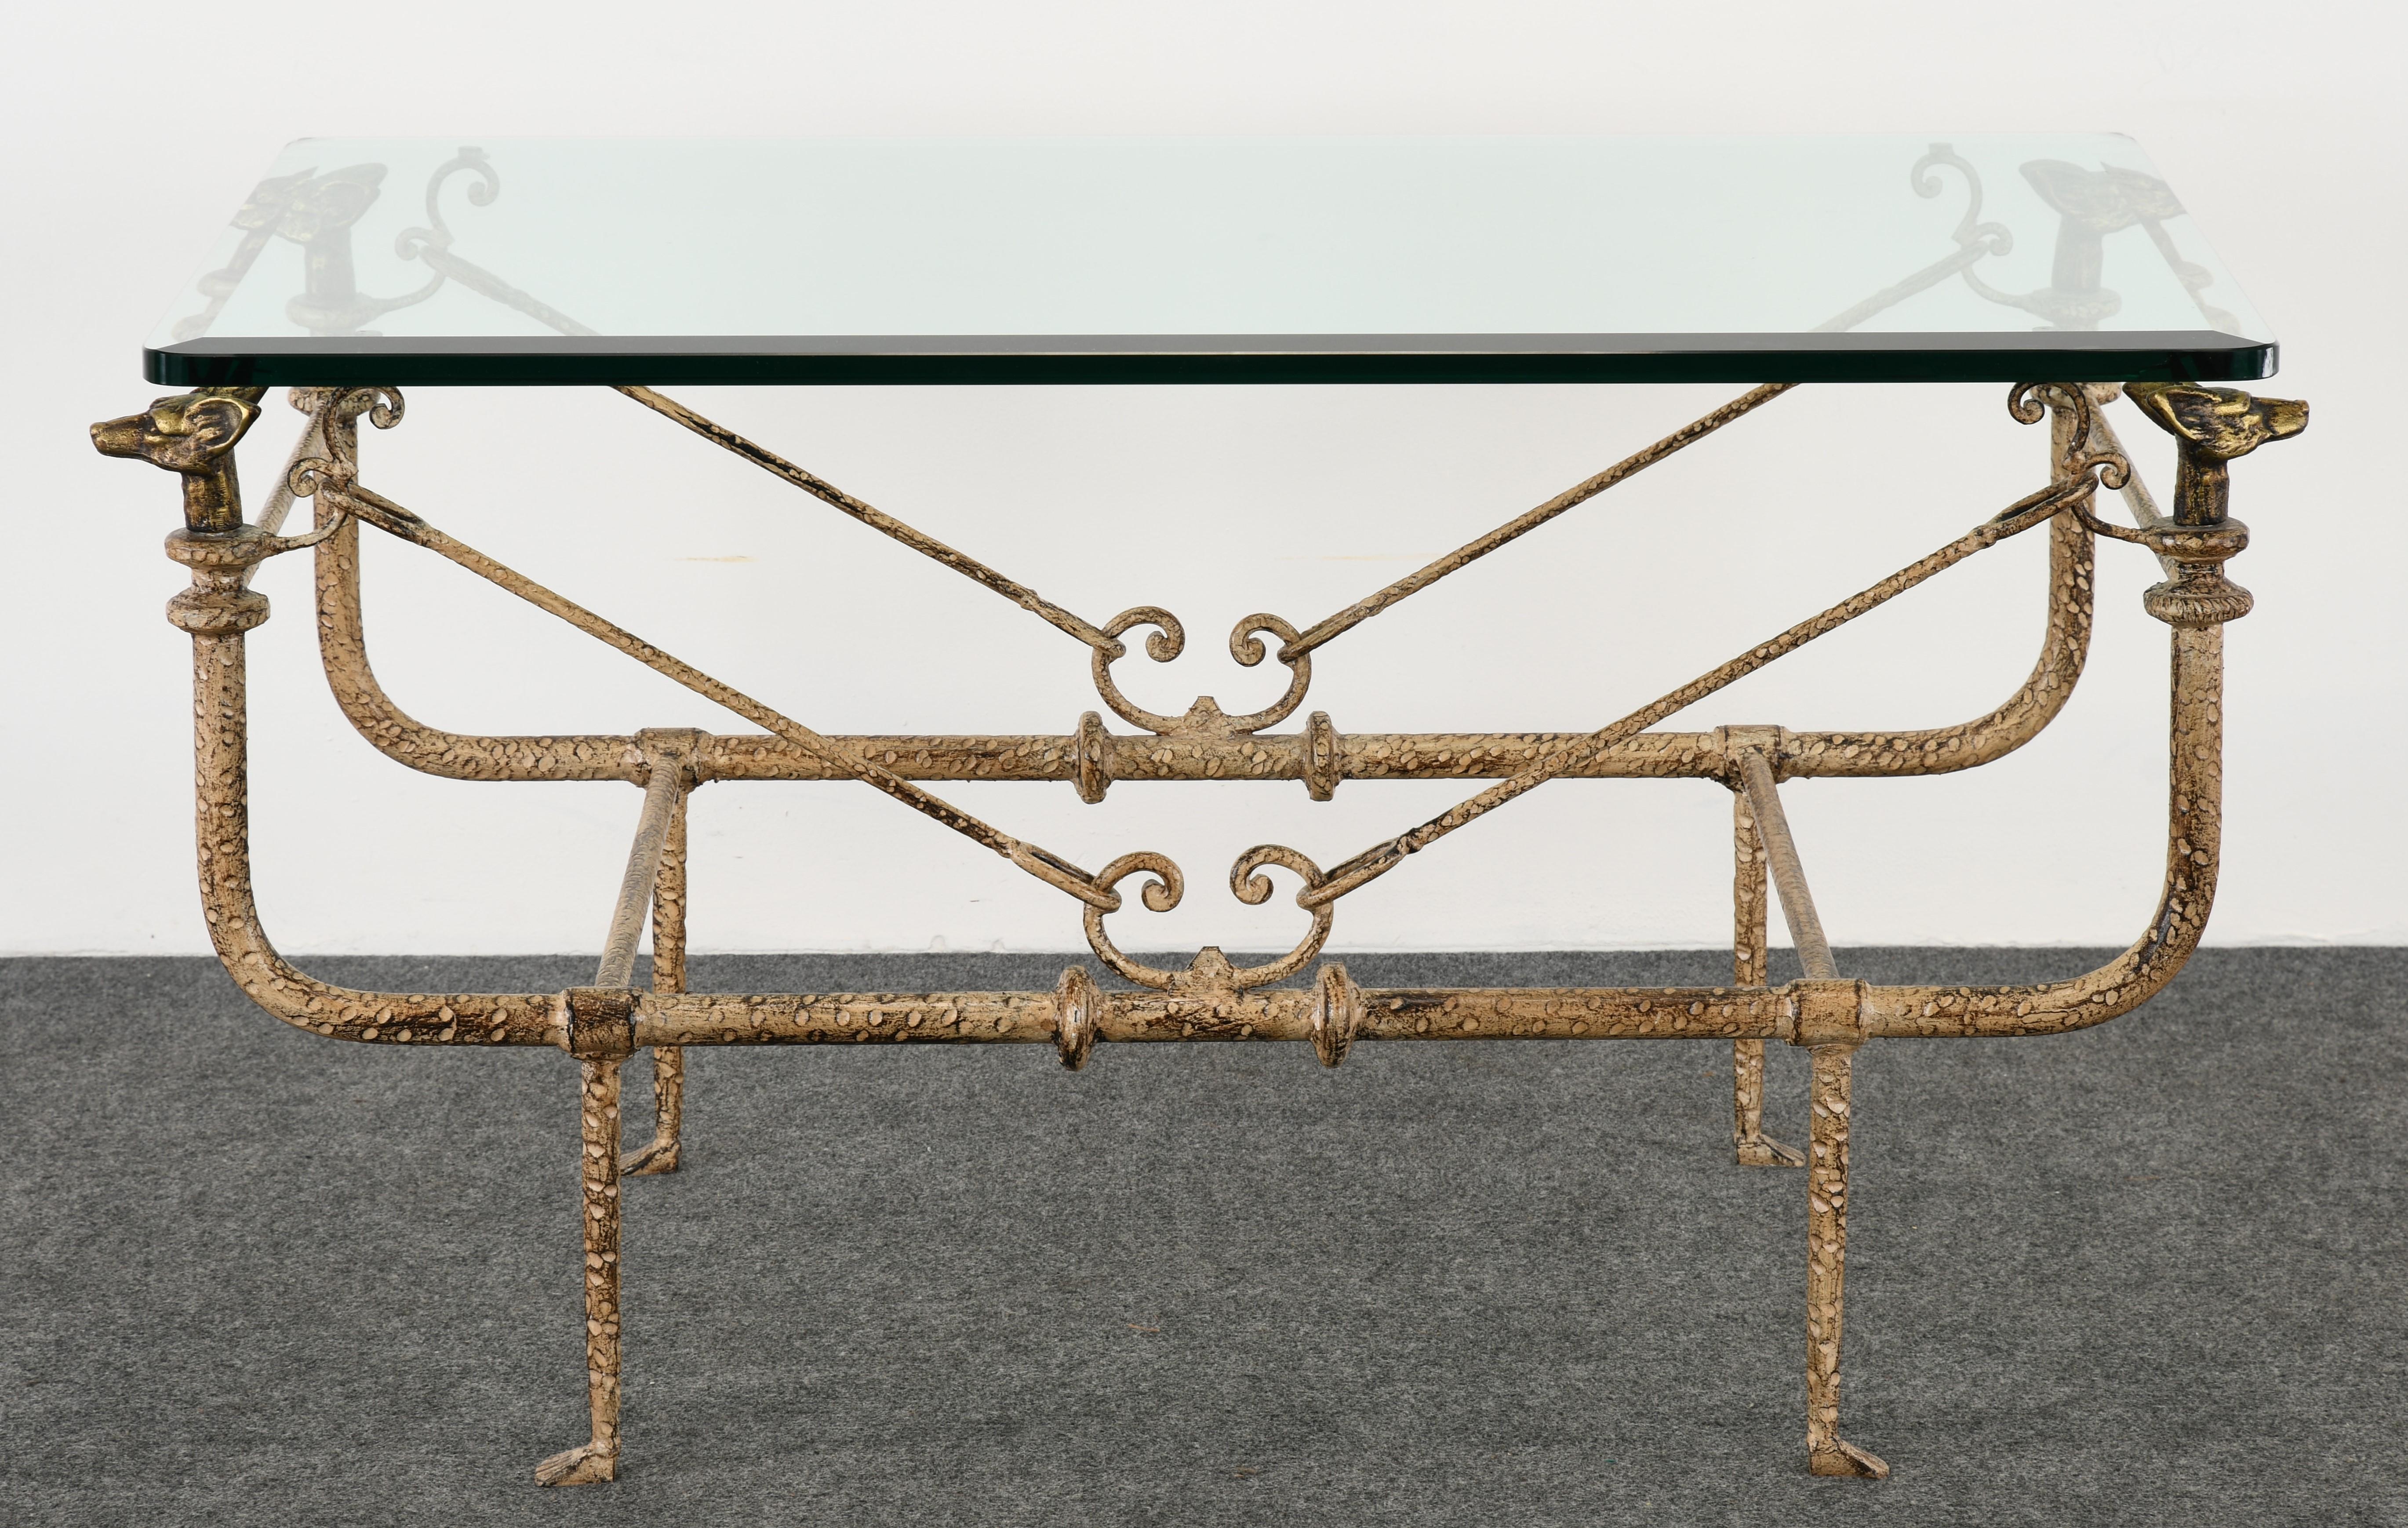 An impressive Giacometti Style Wrought Iron and Bronze Coffee Table by Paul Ferrante. This beautiful distressed painted table has a 3/4